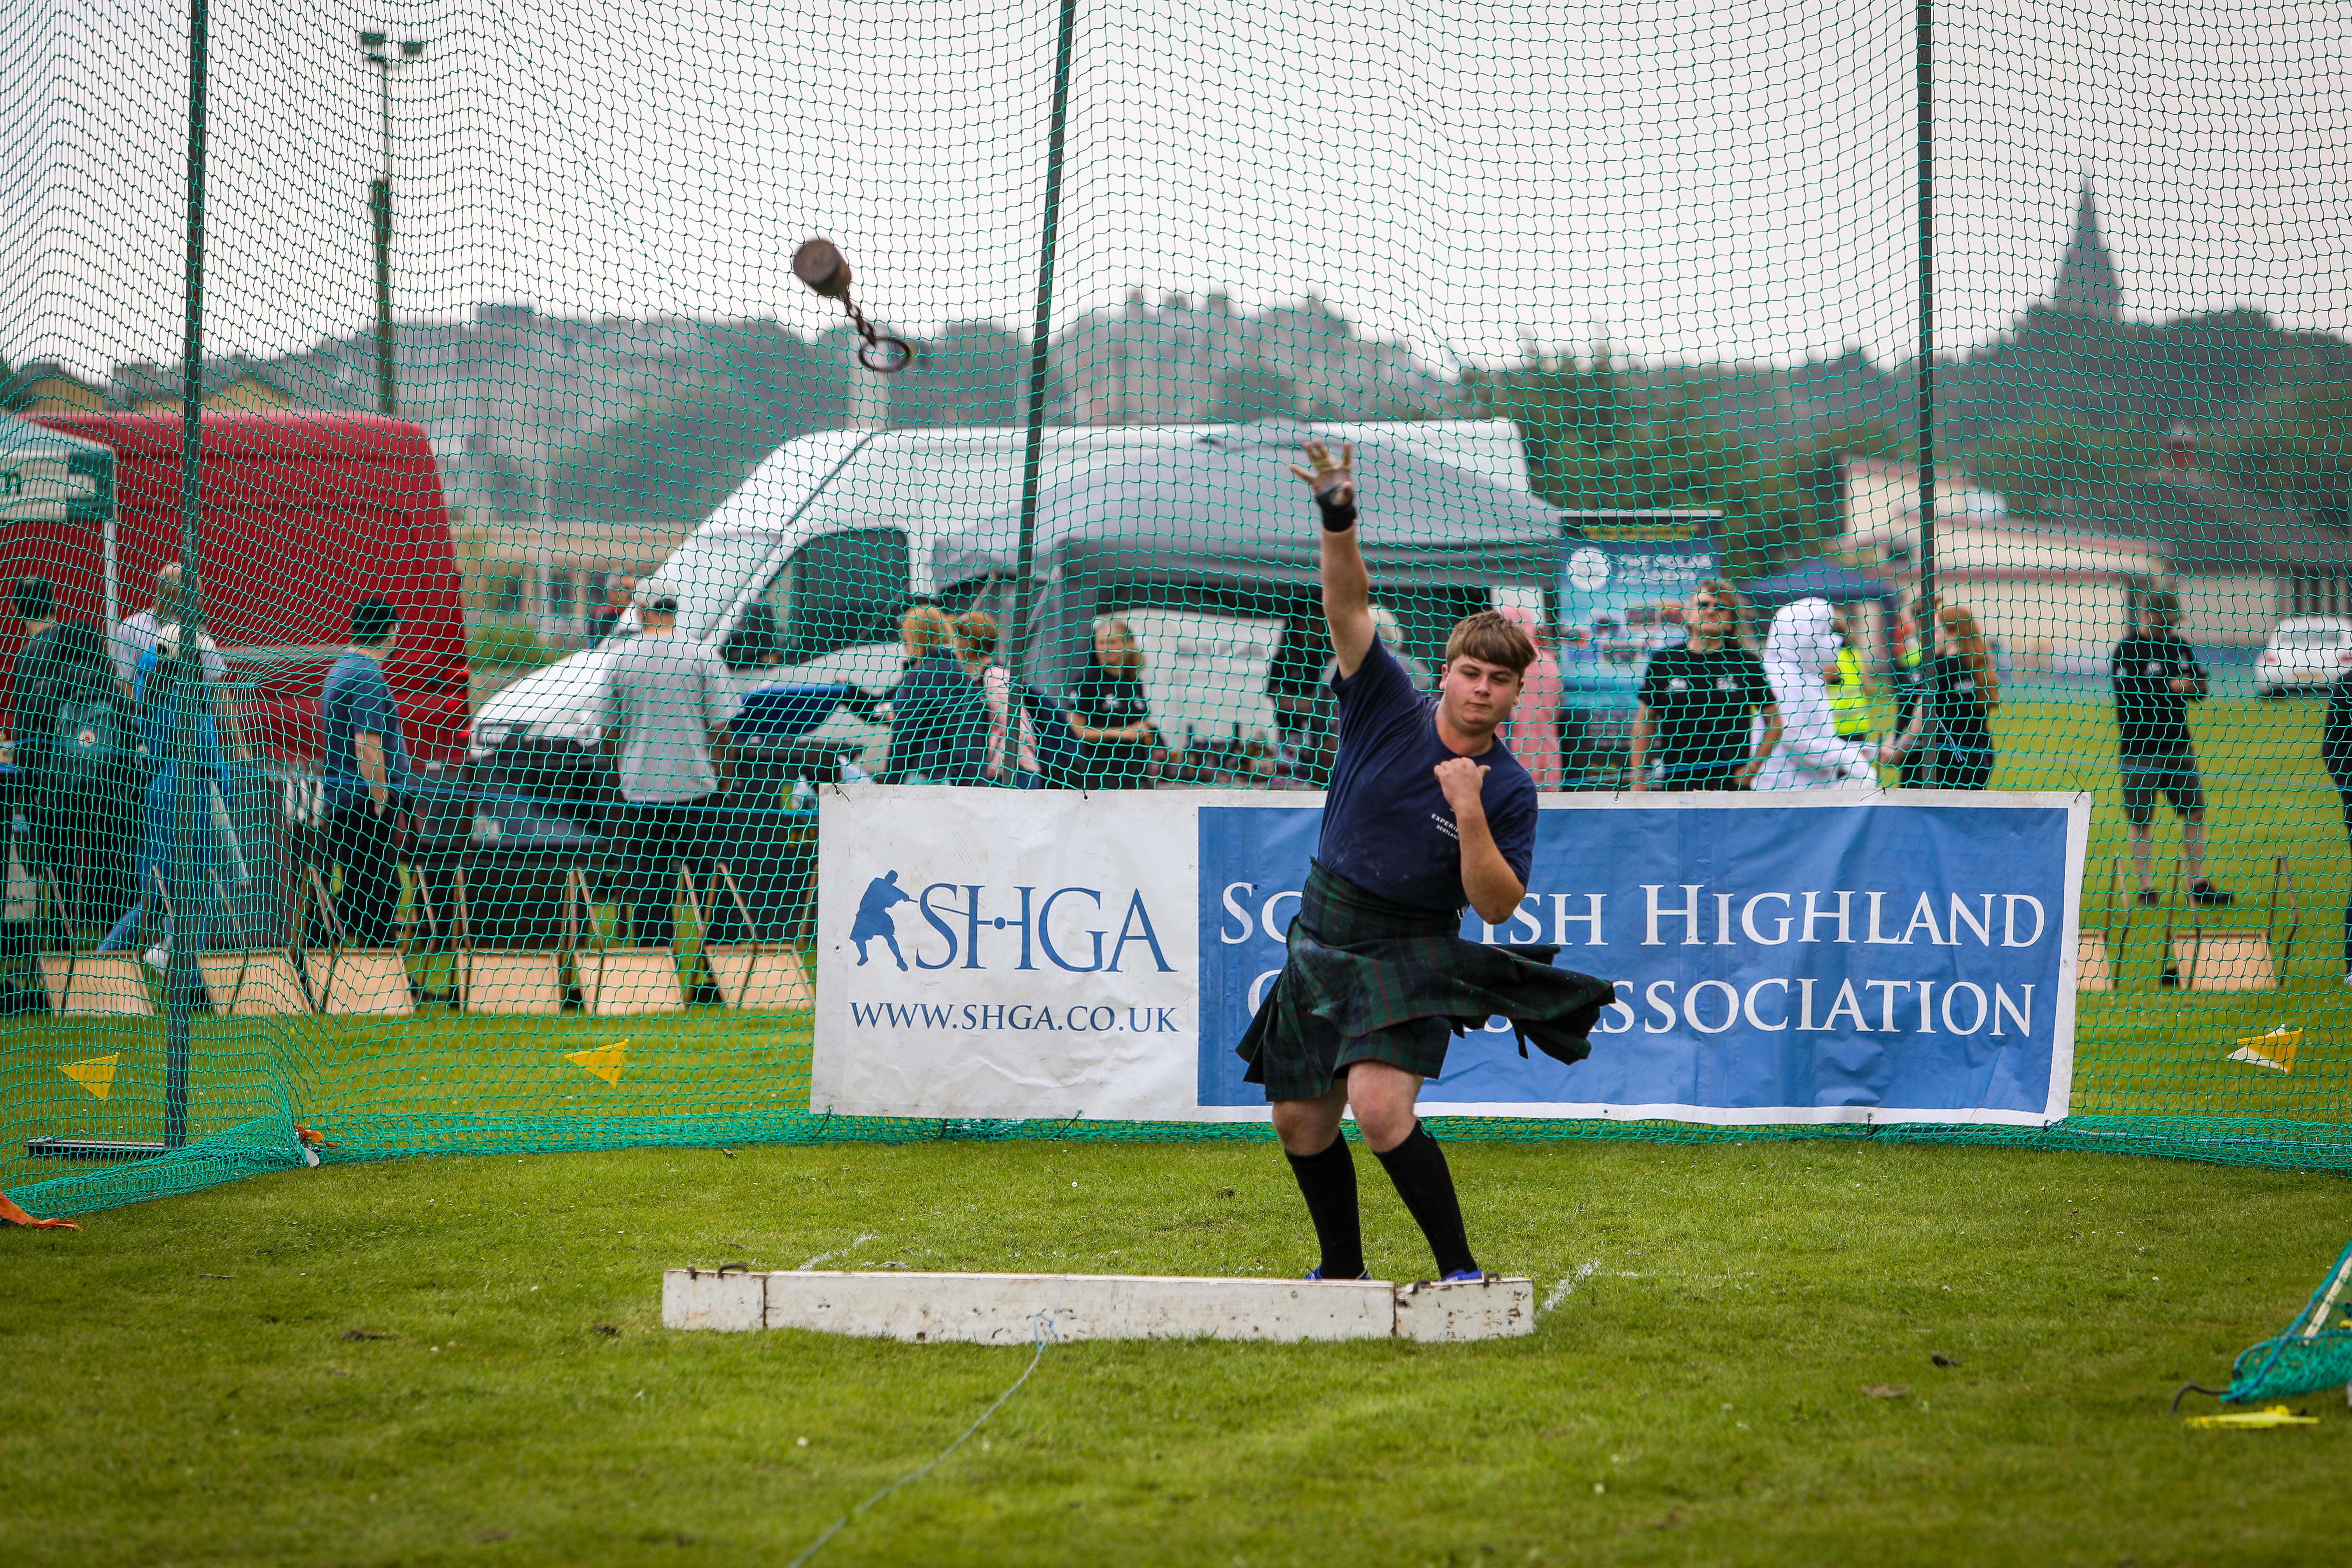 This year's games featured heavyweight events including shot putt for under-18s.